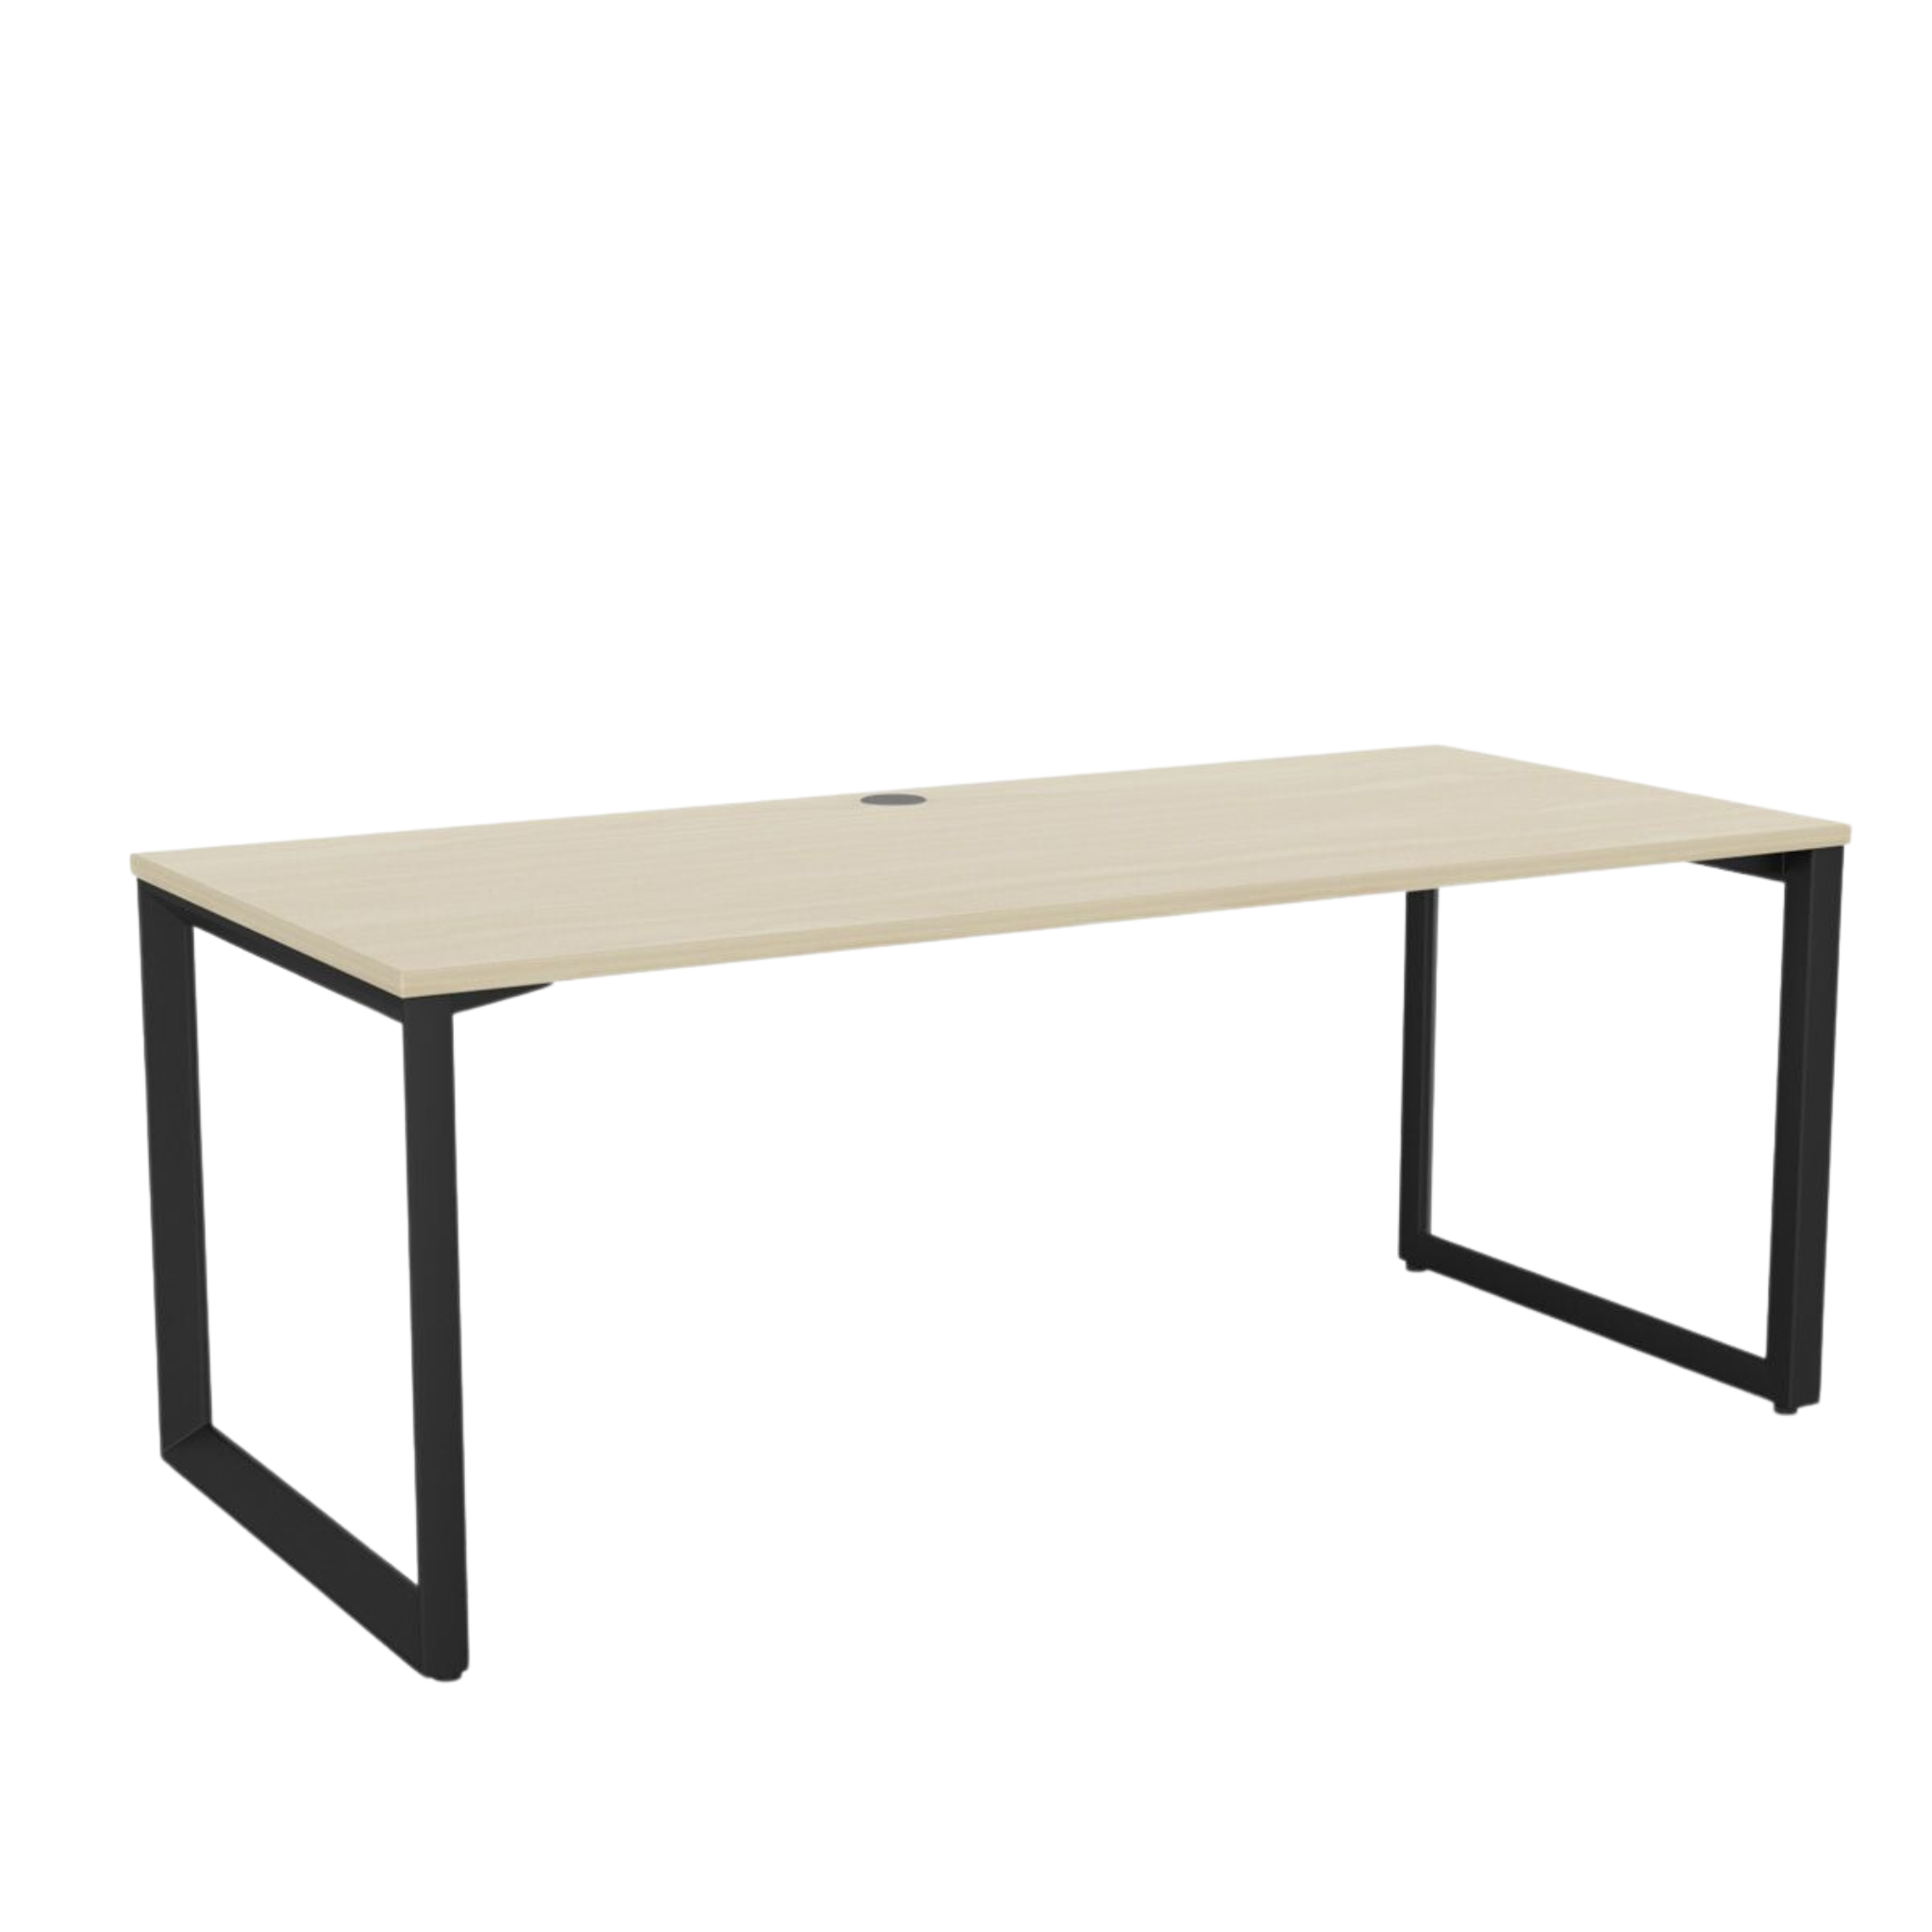 Anvil fixed height desk with black metal frame and nordic maple melteca top